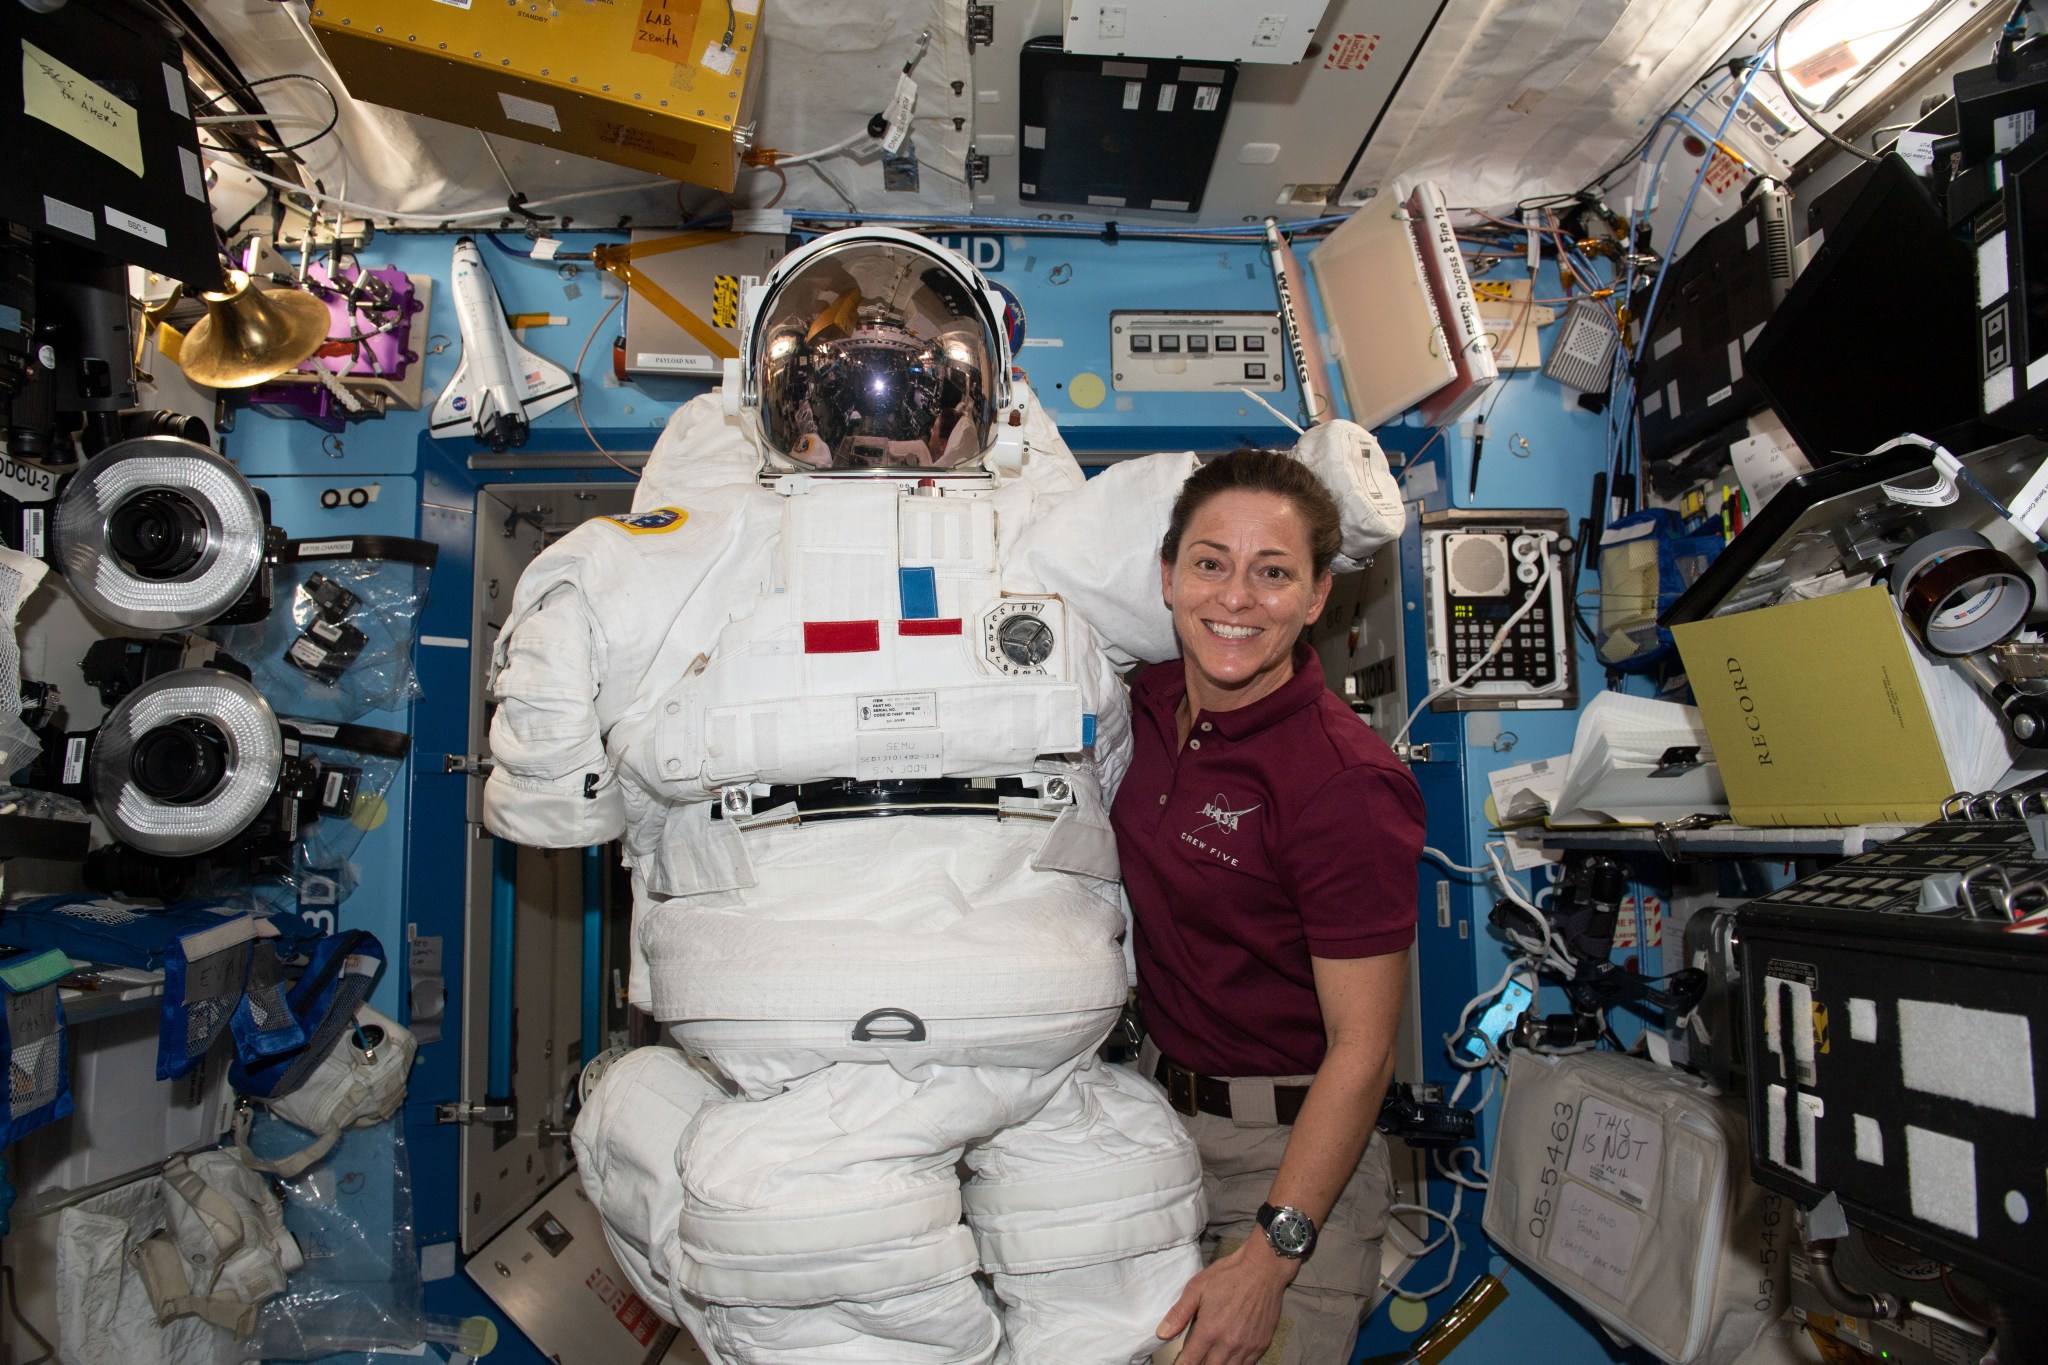 (Dec. 28, 2022) u002du002d- Expedition 68 Flight Engineer and NASA astronaut Nicole Mann poses with an Extravehicular Mobility Unit (EMU), also known as a spacesuit, aboard the International Space Station.